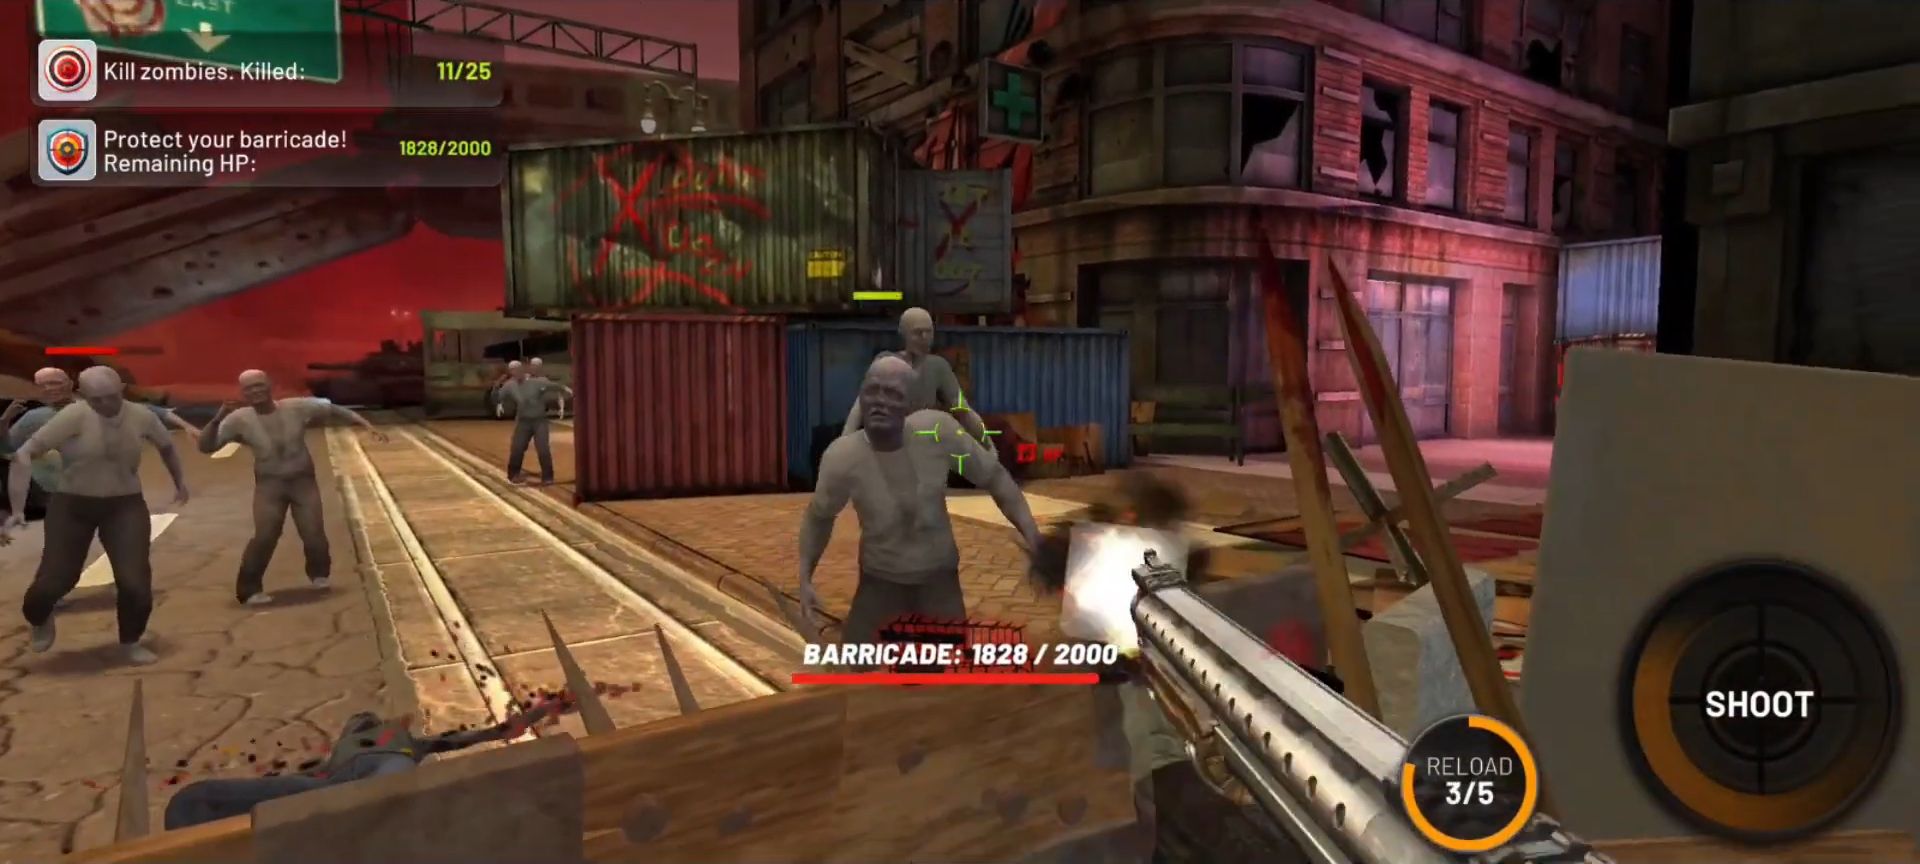 Deadlander: FPS Zombie Game - Android game screenshots.